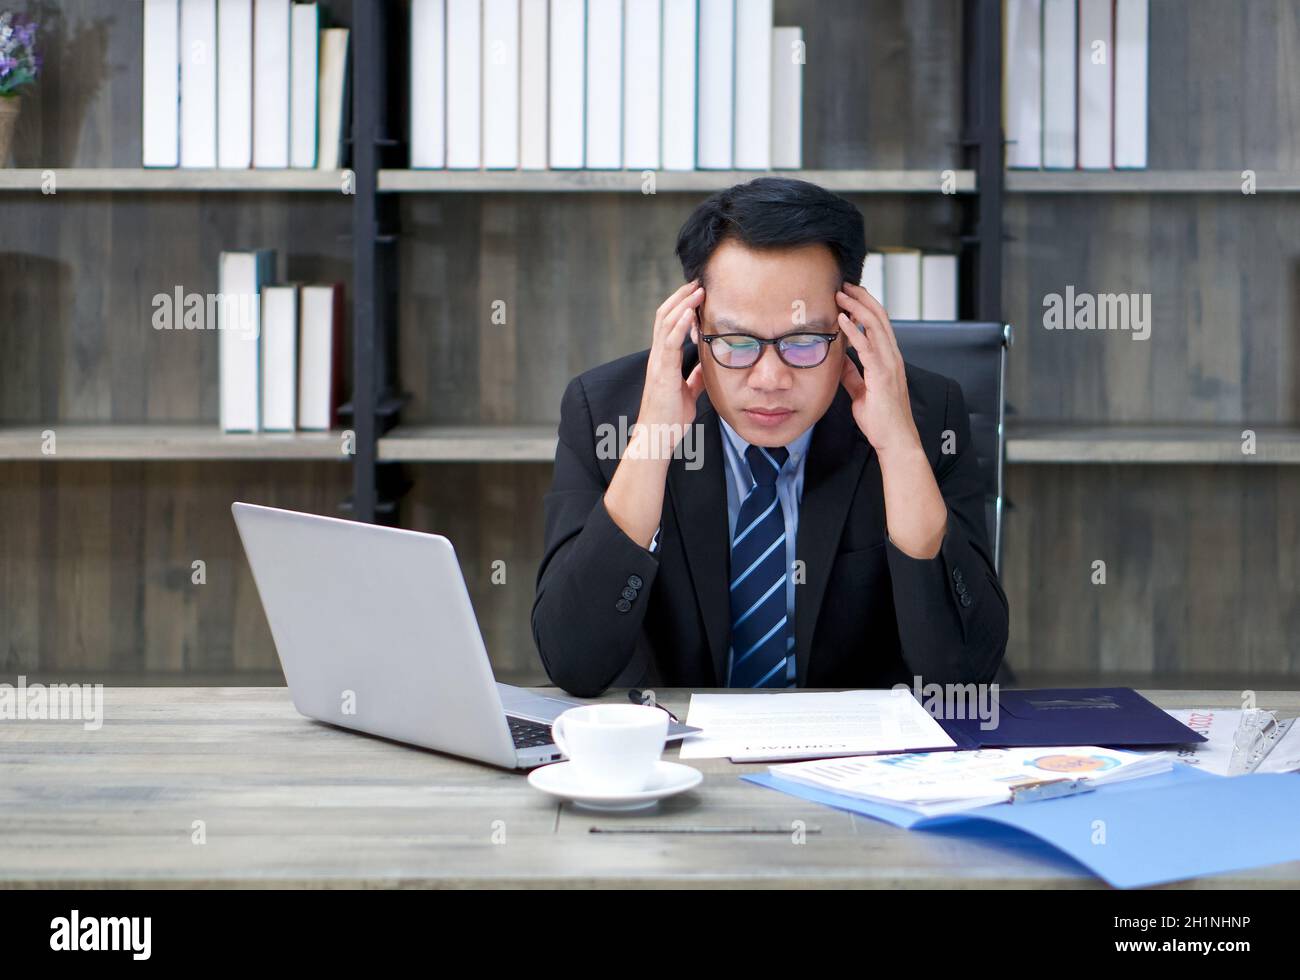 Sad Asian businessman holds his temple with both hands, sitting in the office. The concept of unemployed, sadness, depressed and human problems. Stock Photo